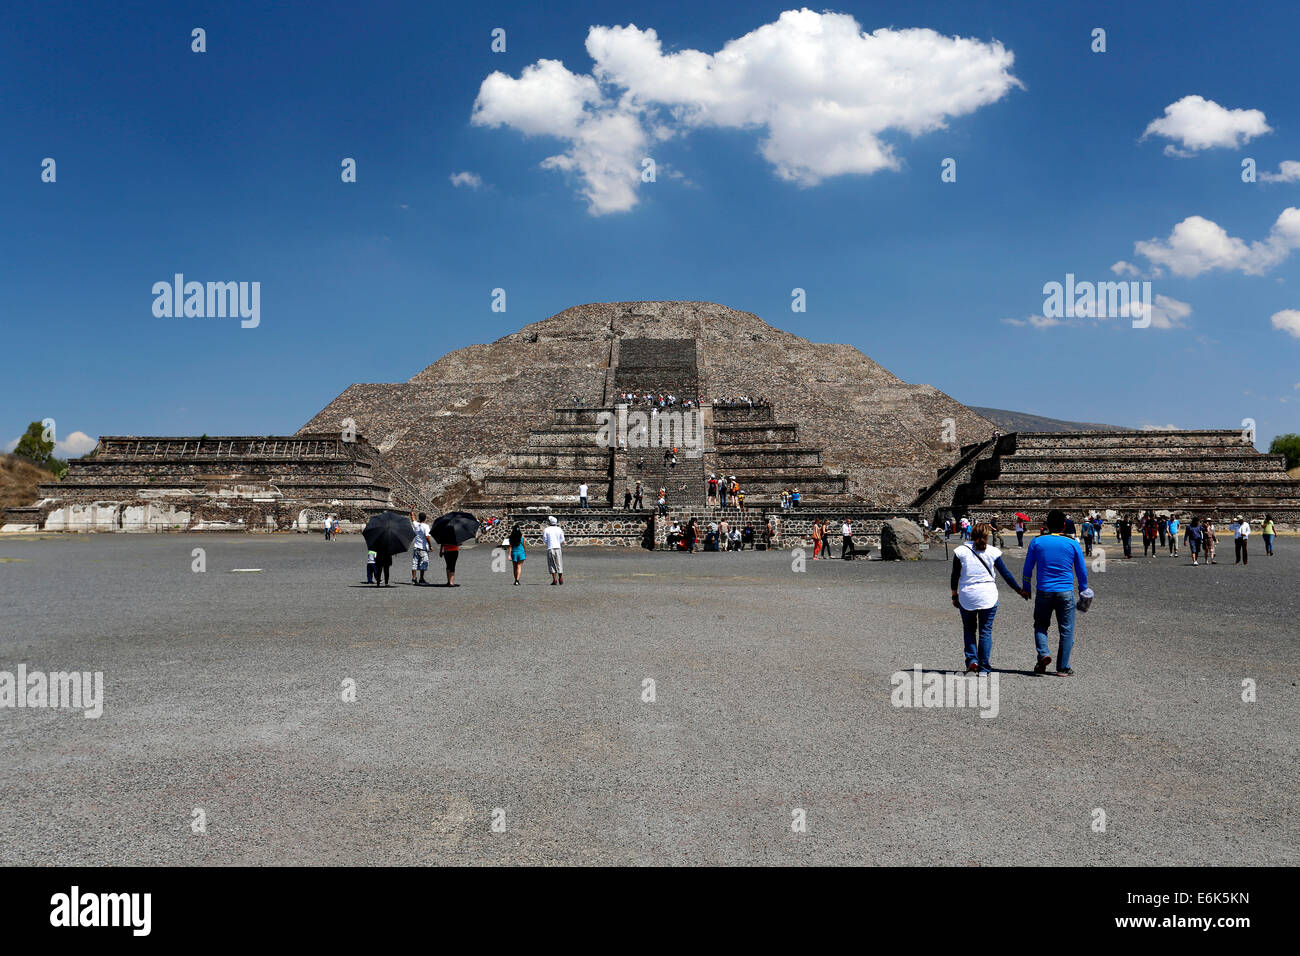 Pyramids of Teotihuacan, UNESCO World Heritage Site, State of Mexico, Mexico Stock Photo